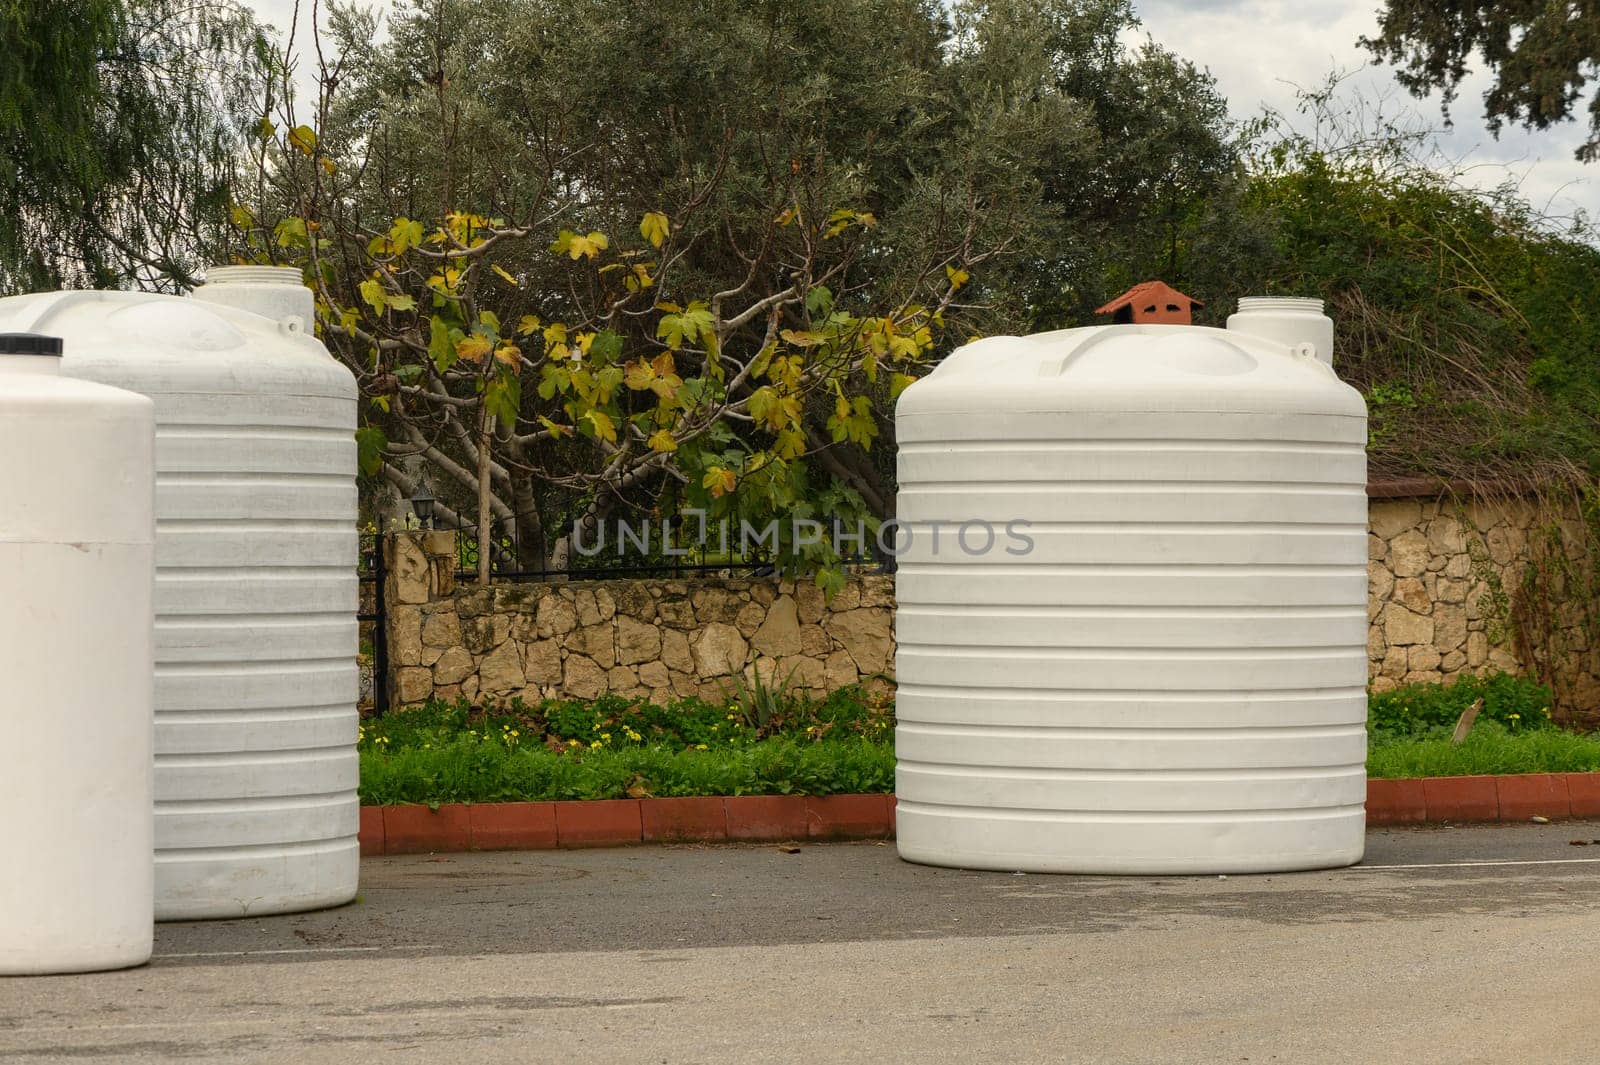 selling water tanks in a village in Cyprus 1